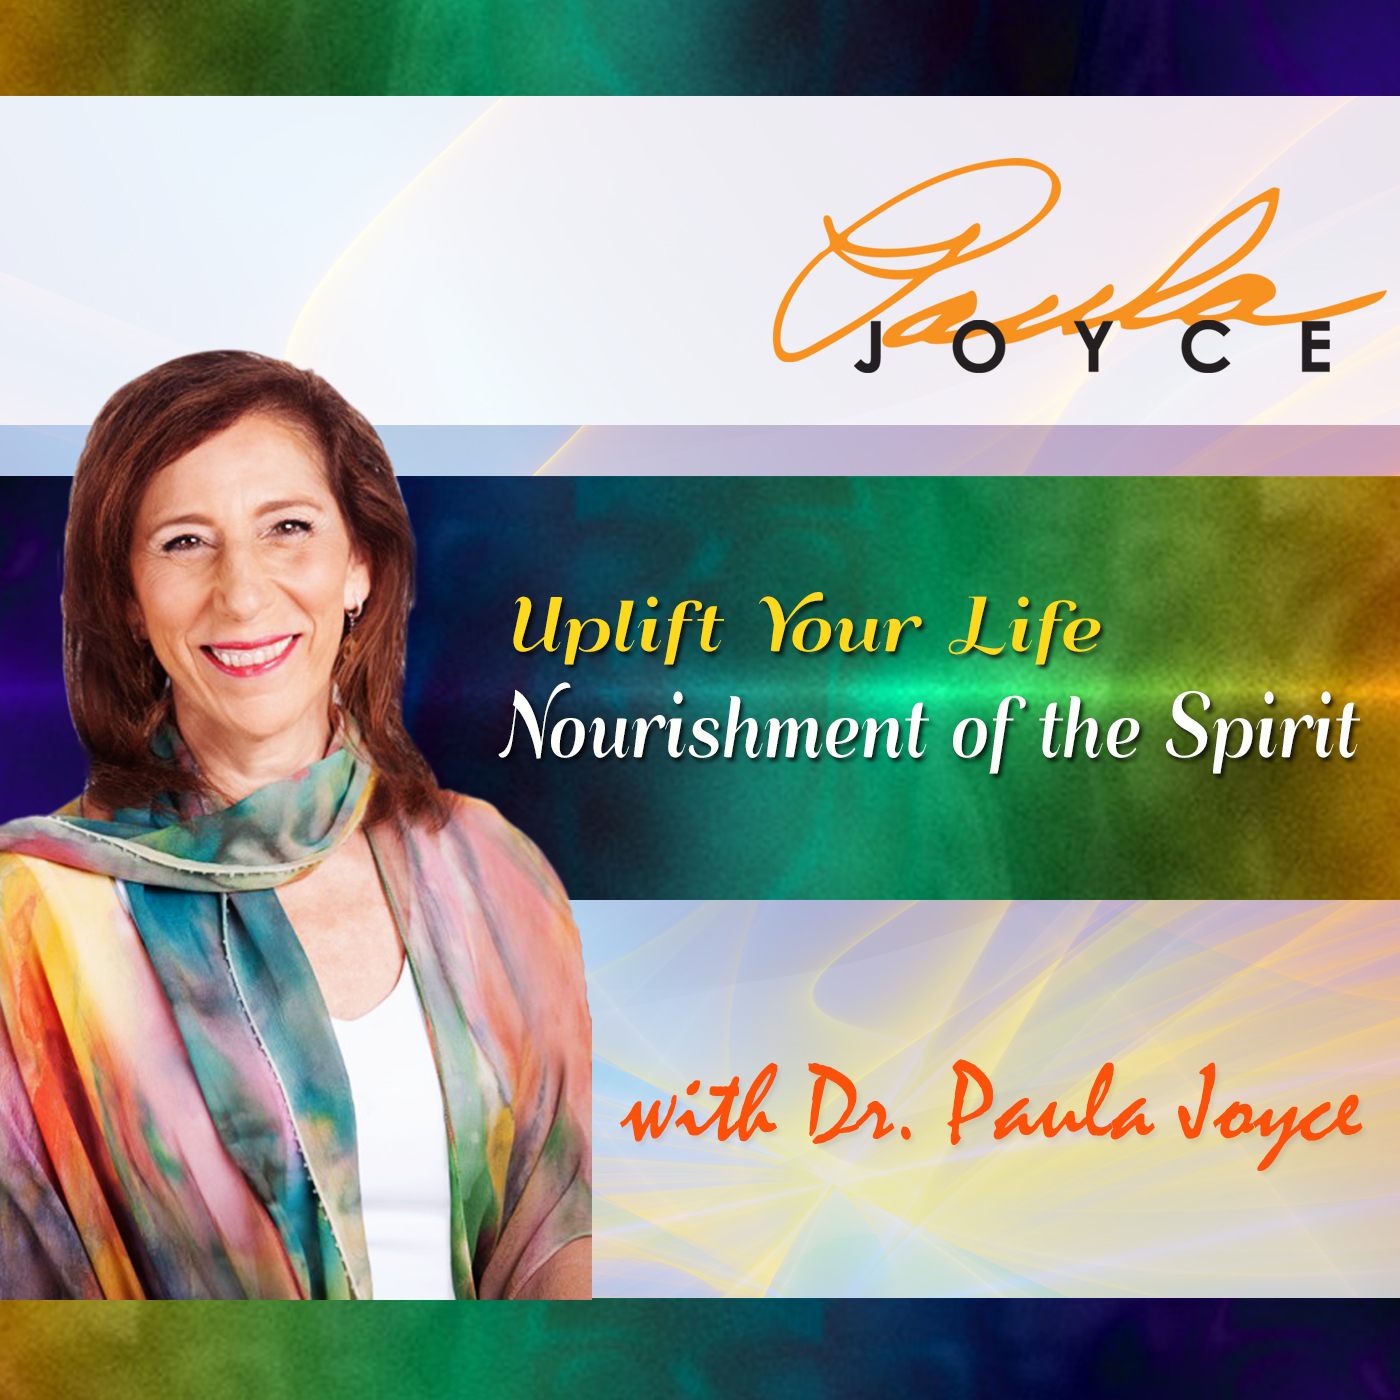 The Important Role of Women in the Buddha’s Life By Dr. Paula Joyce